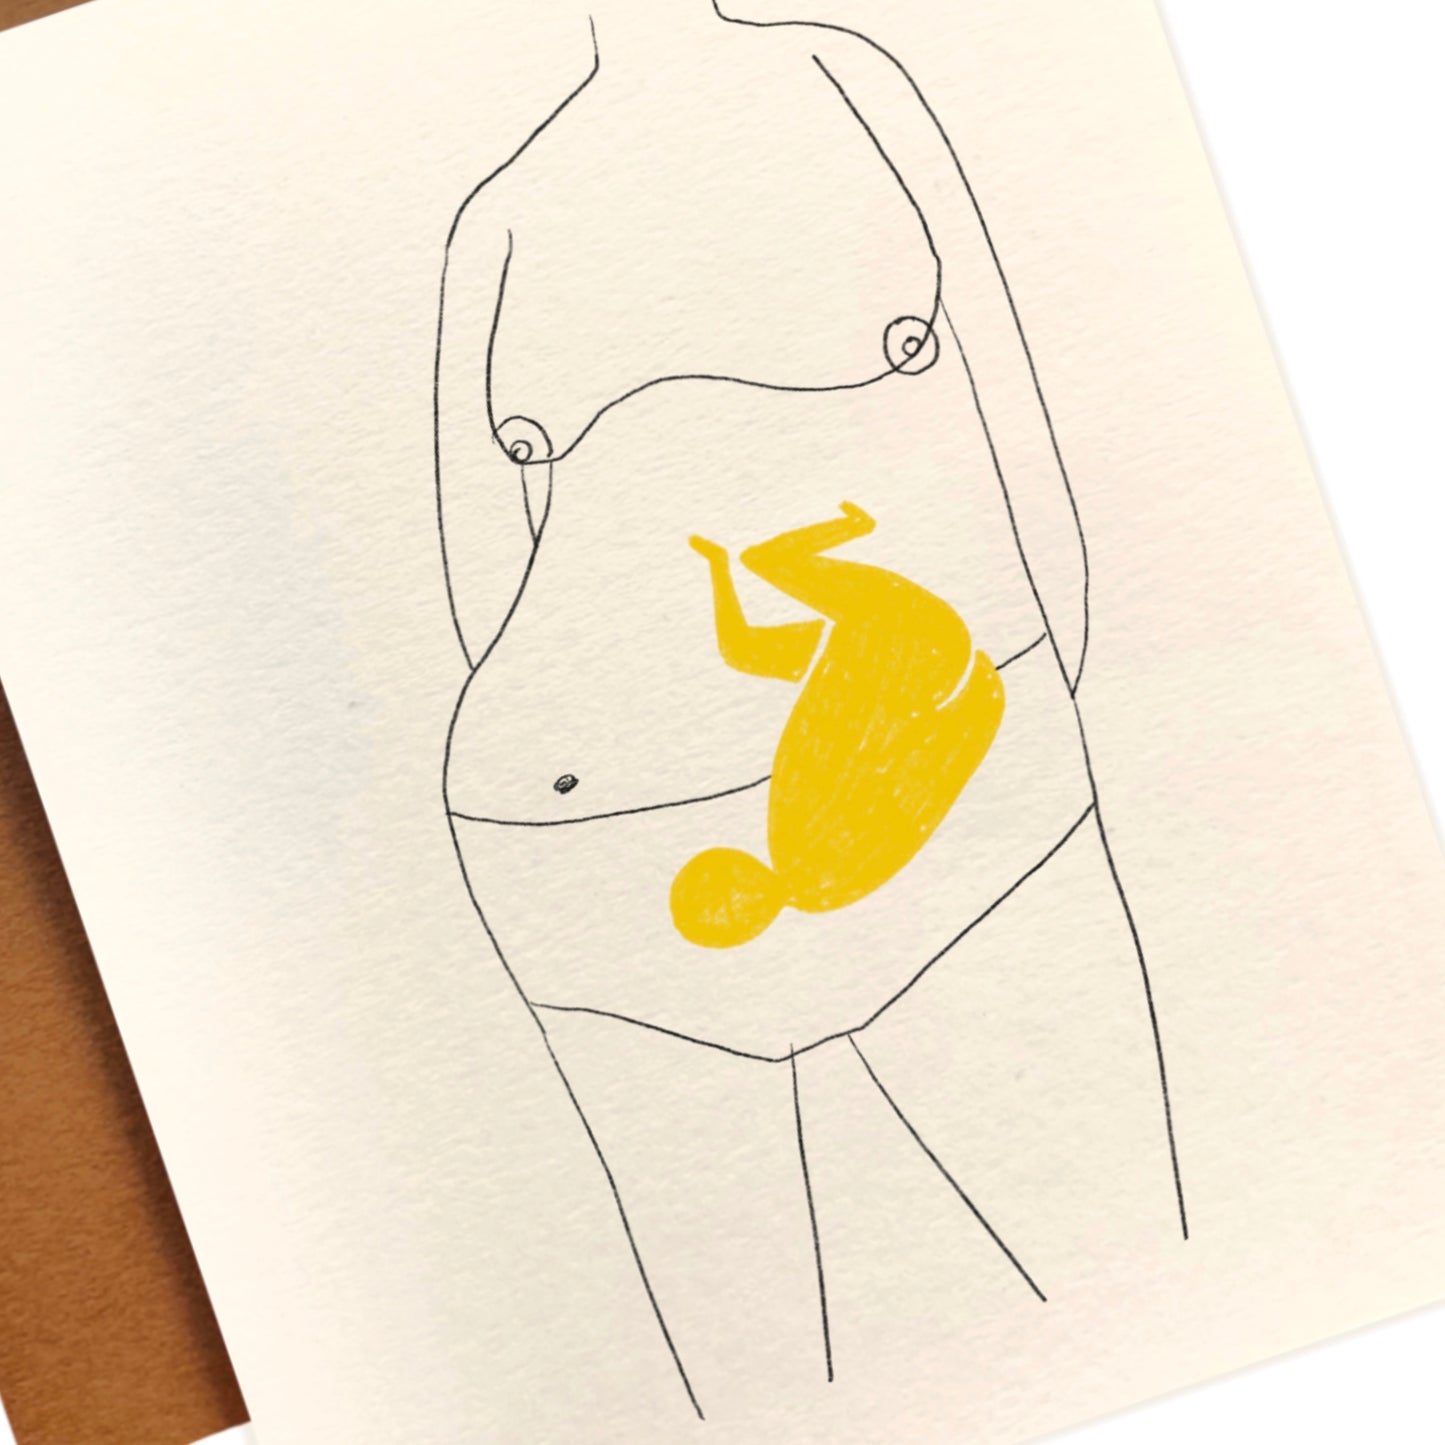 PREGNANT BELLY Card